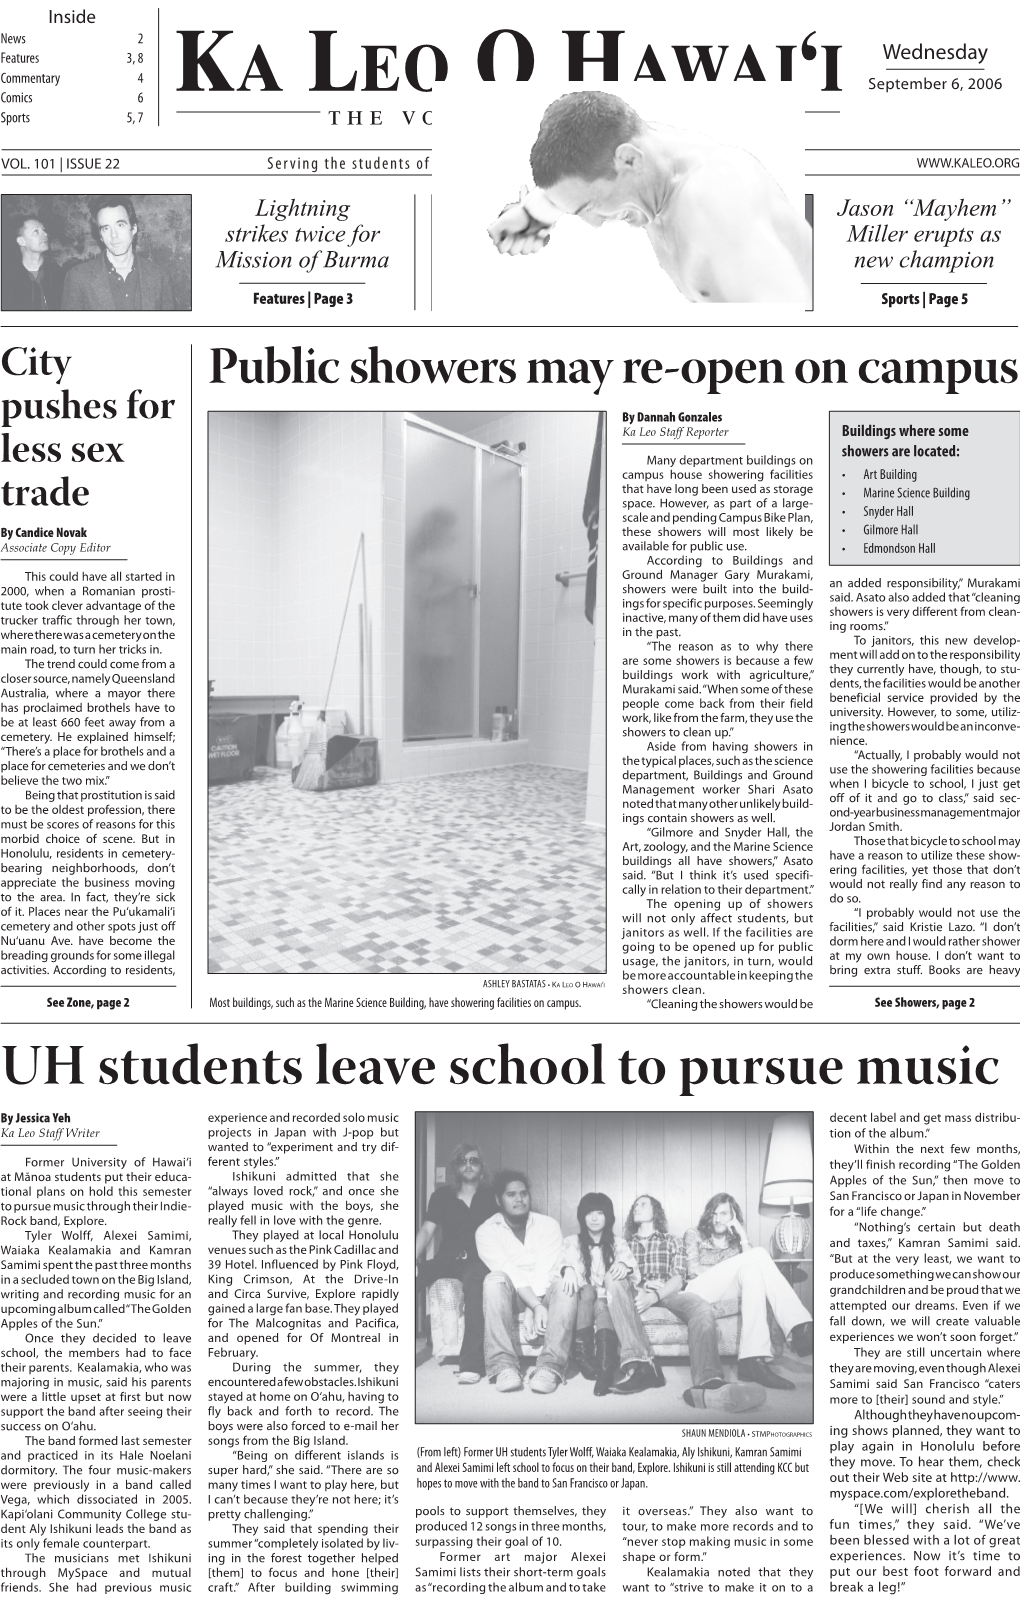 UH Students Leave School to Pursue Music